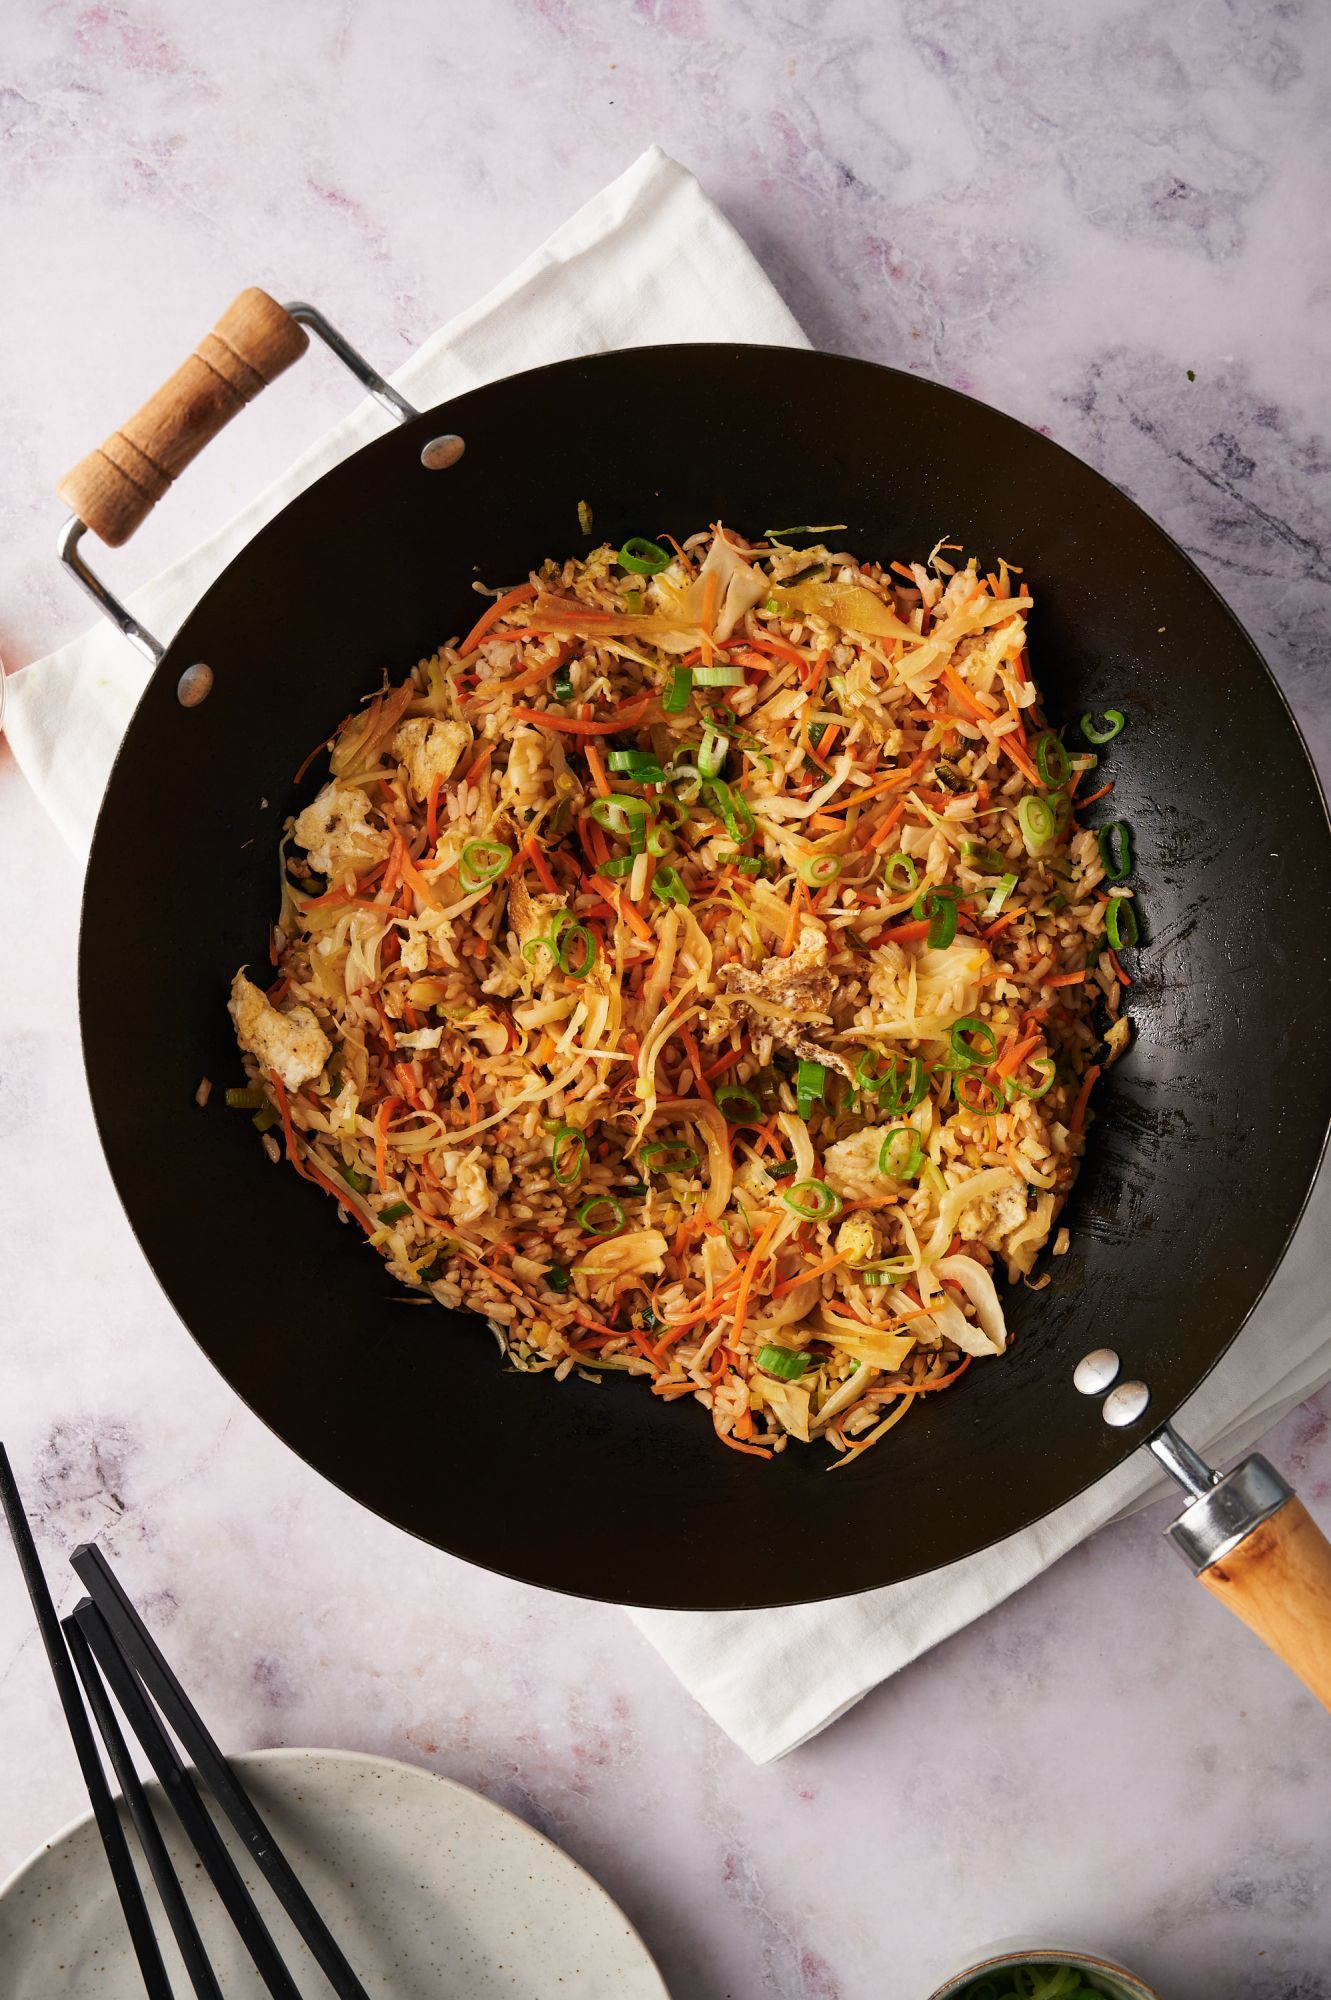 Wok with healthy fried rice made with eggs, carrots, cabbage, sot sauce, and green onions.